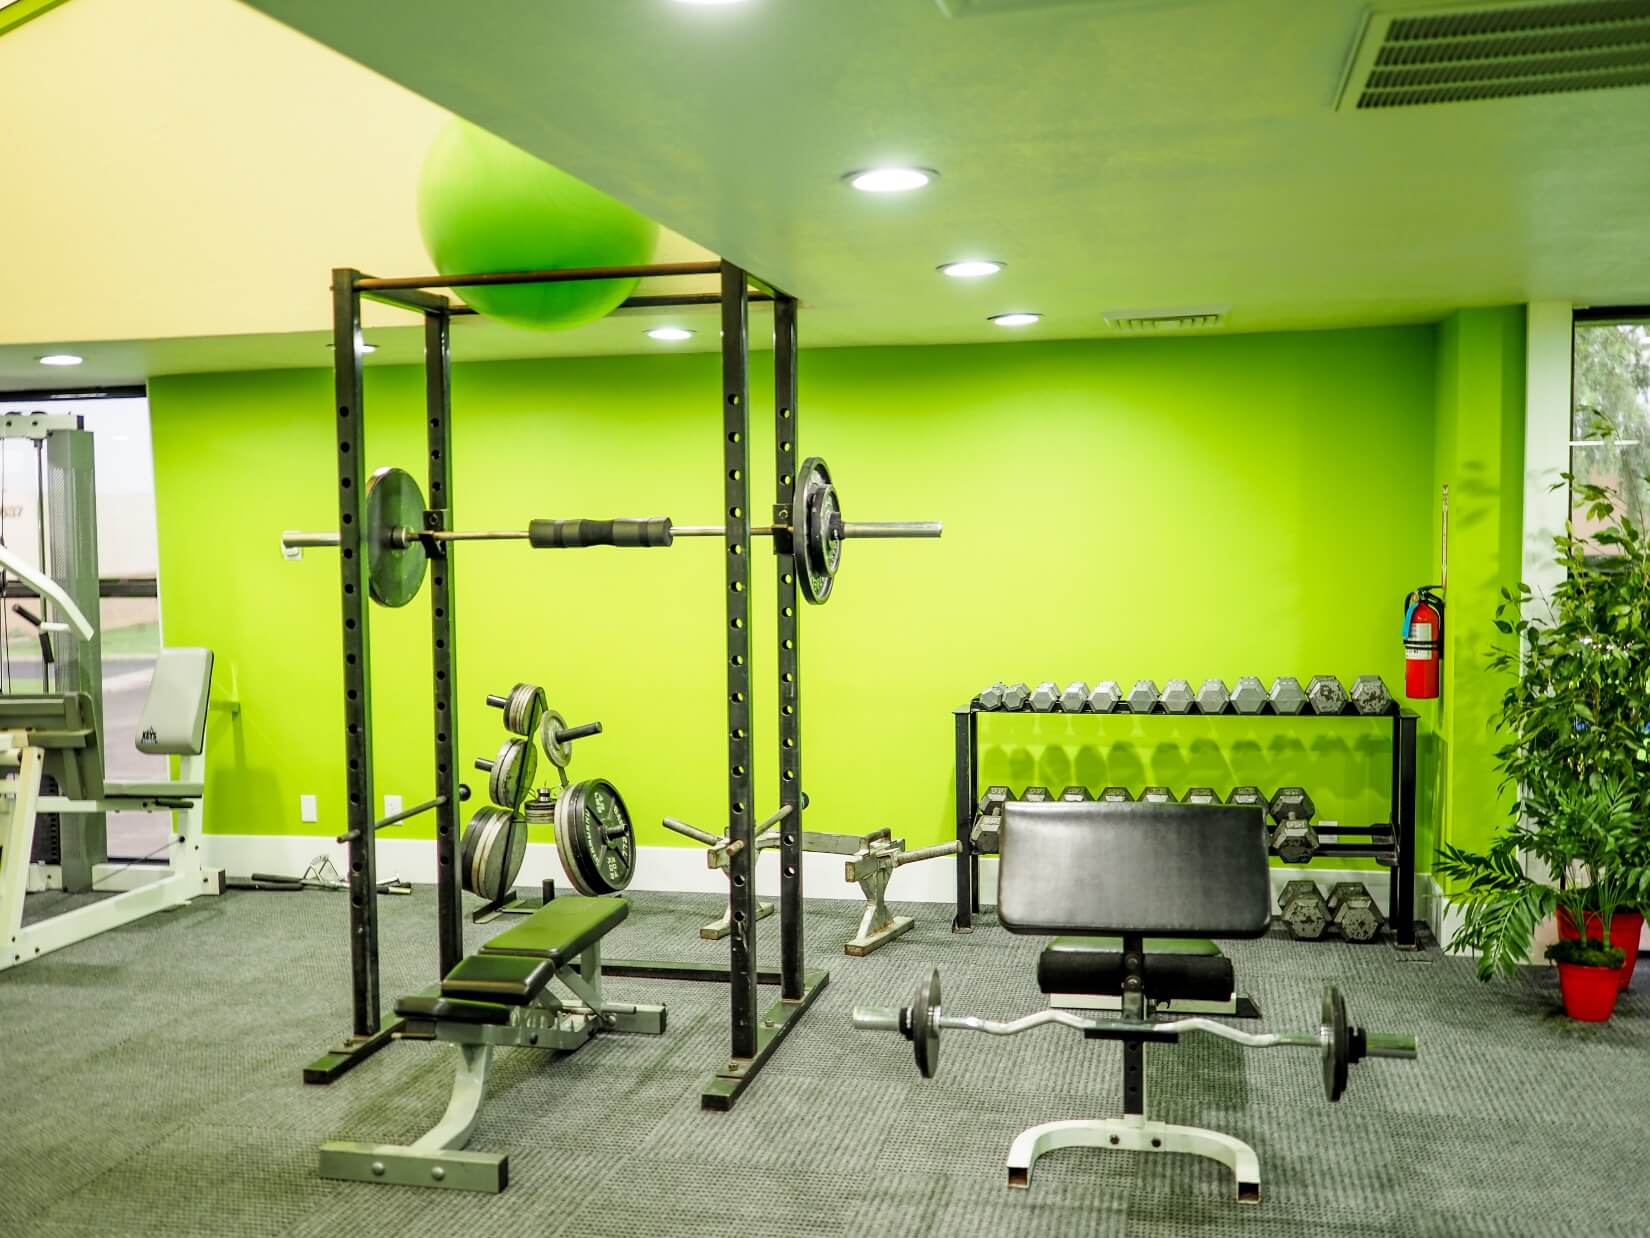 Image of the upstairs gym